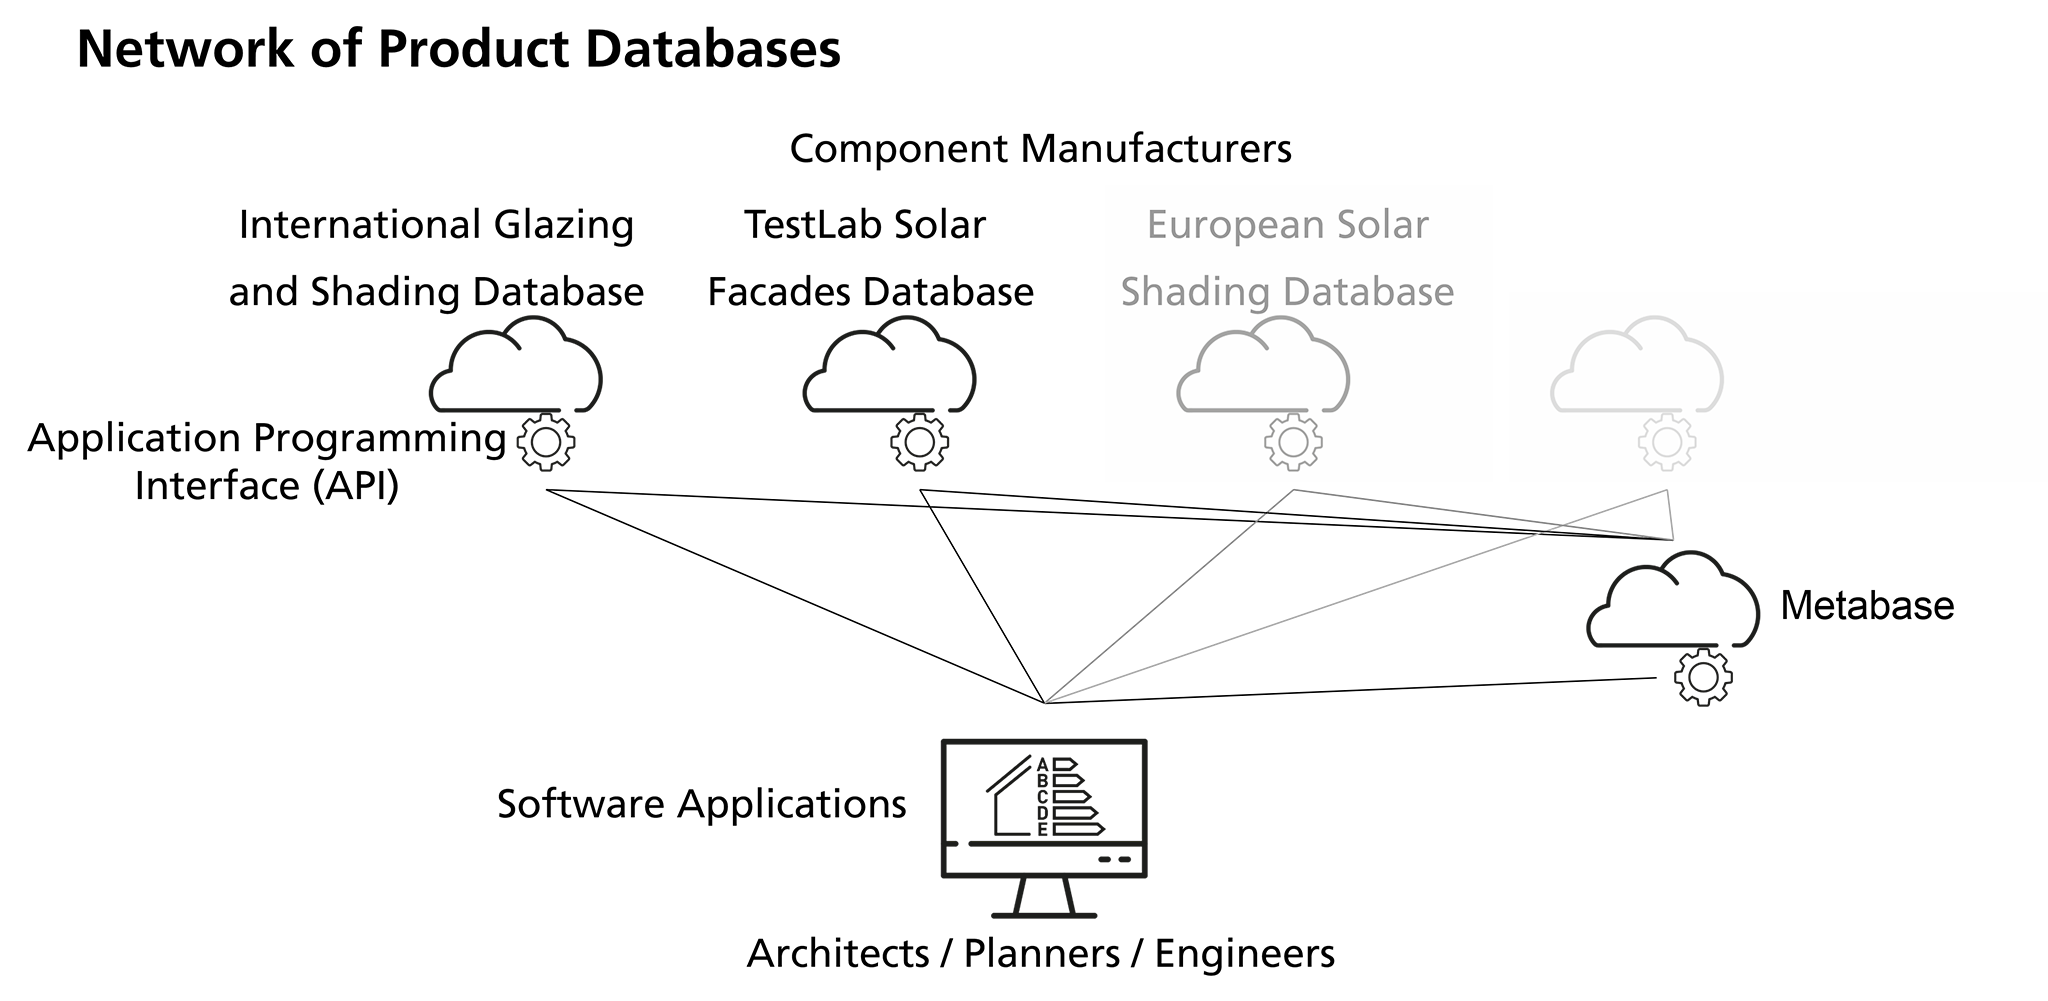 Schematic drawing of the network of product databases